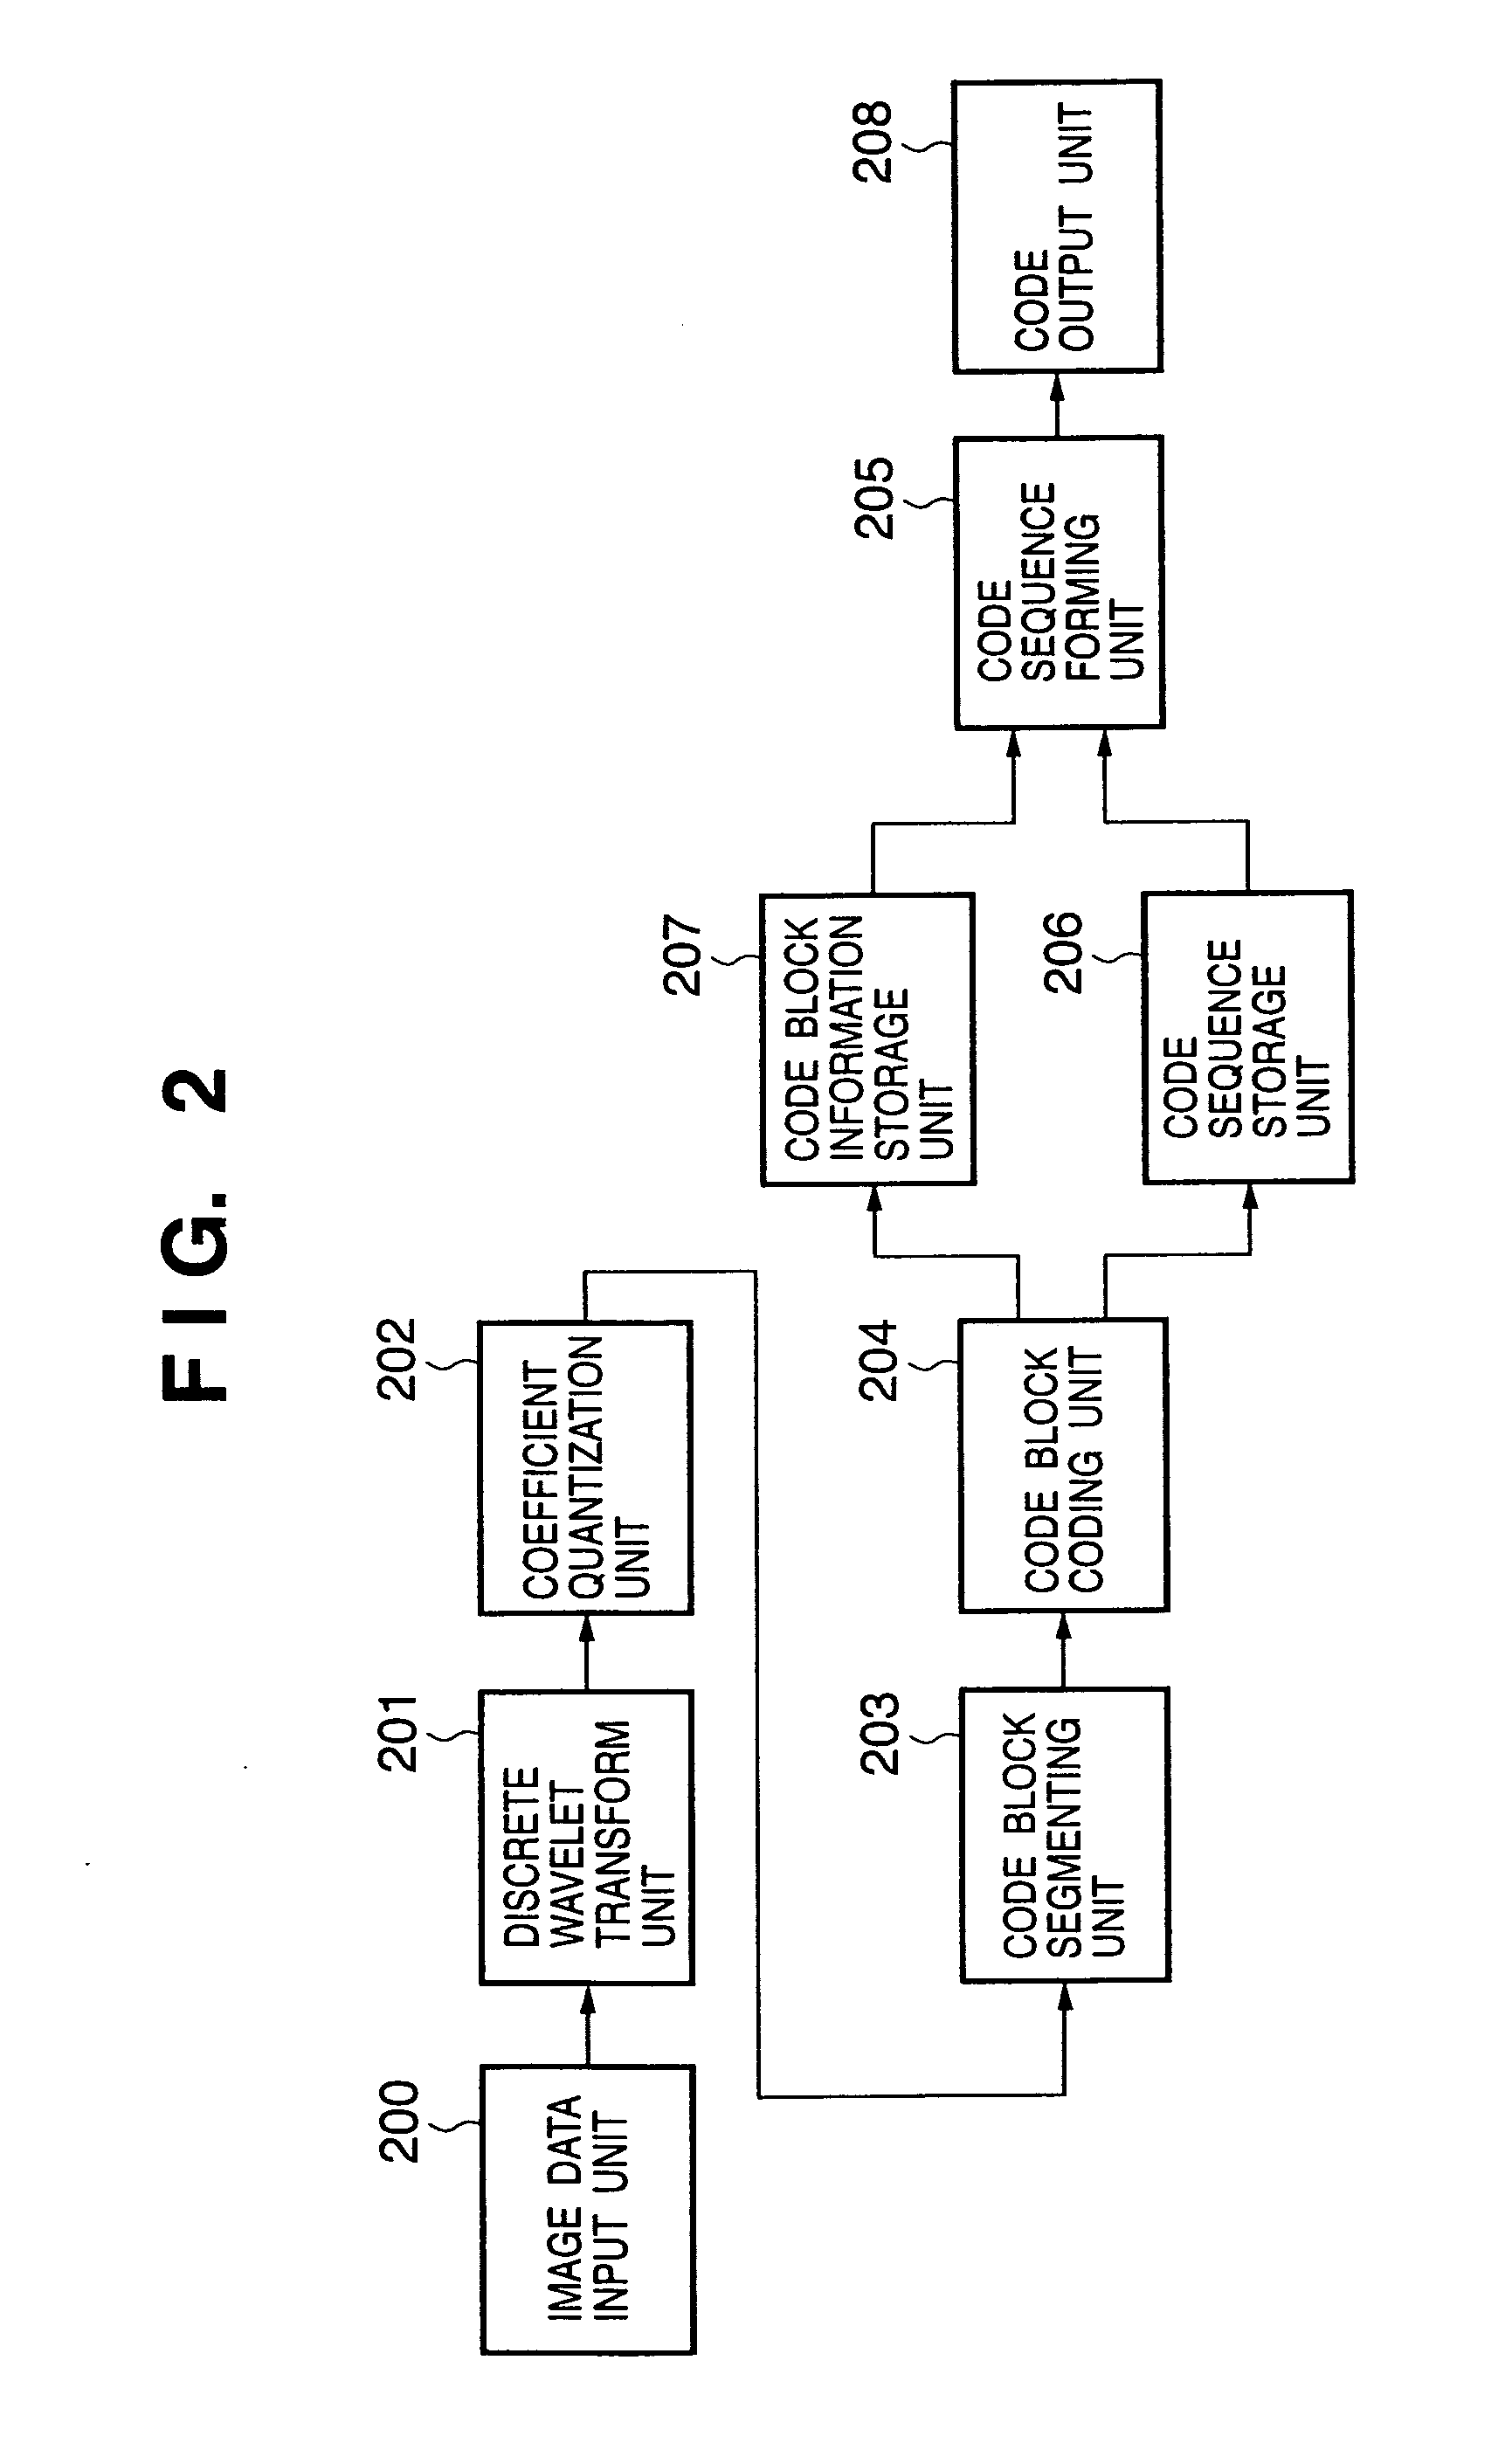 Image coding method and apparatus